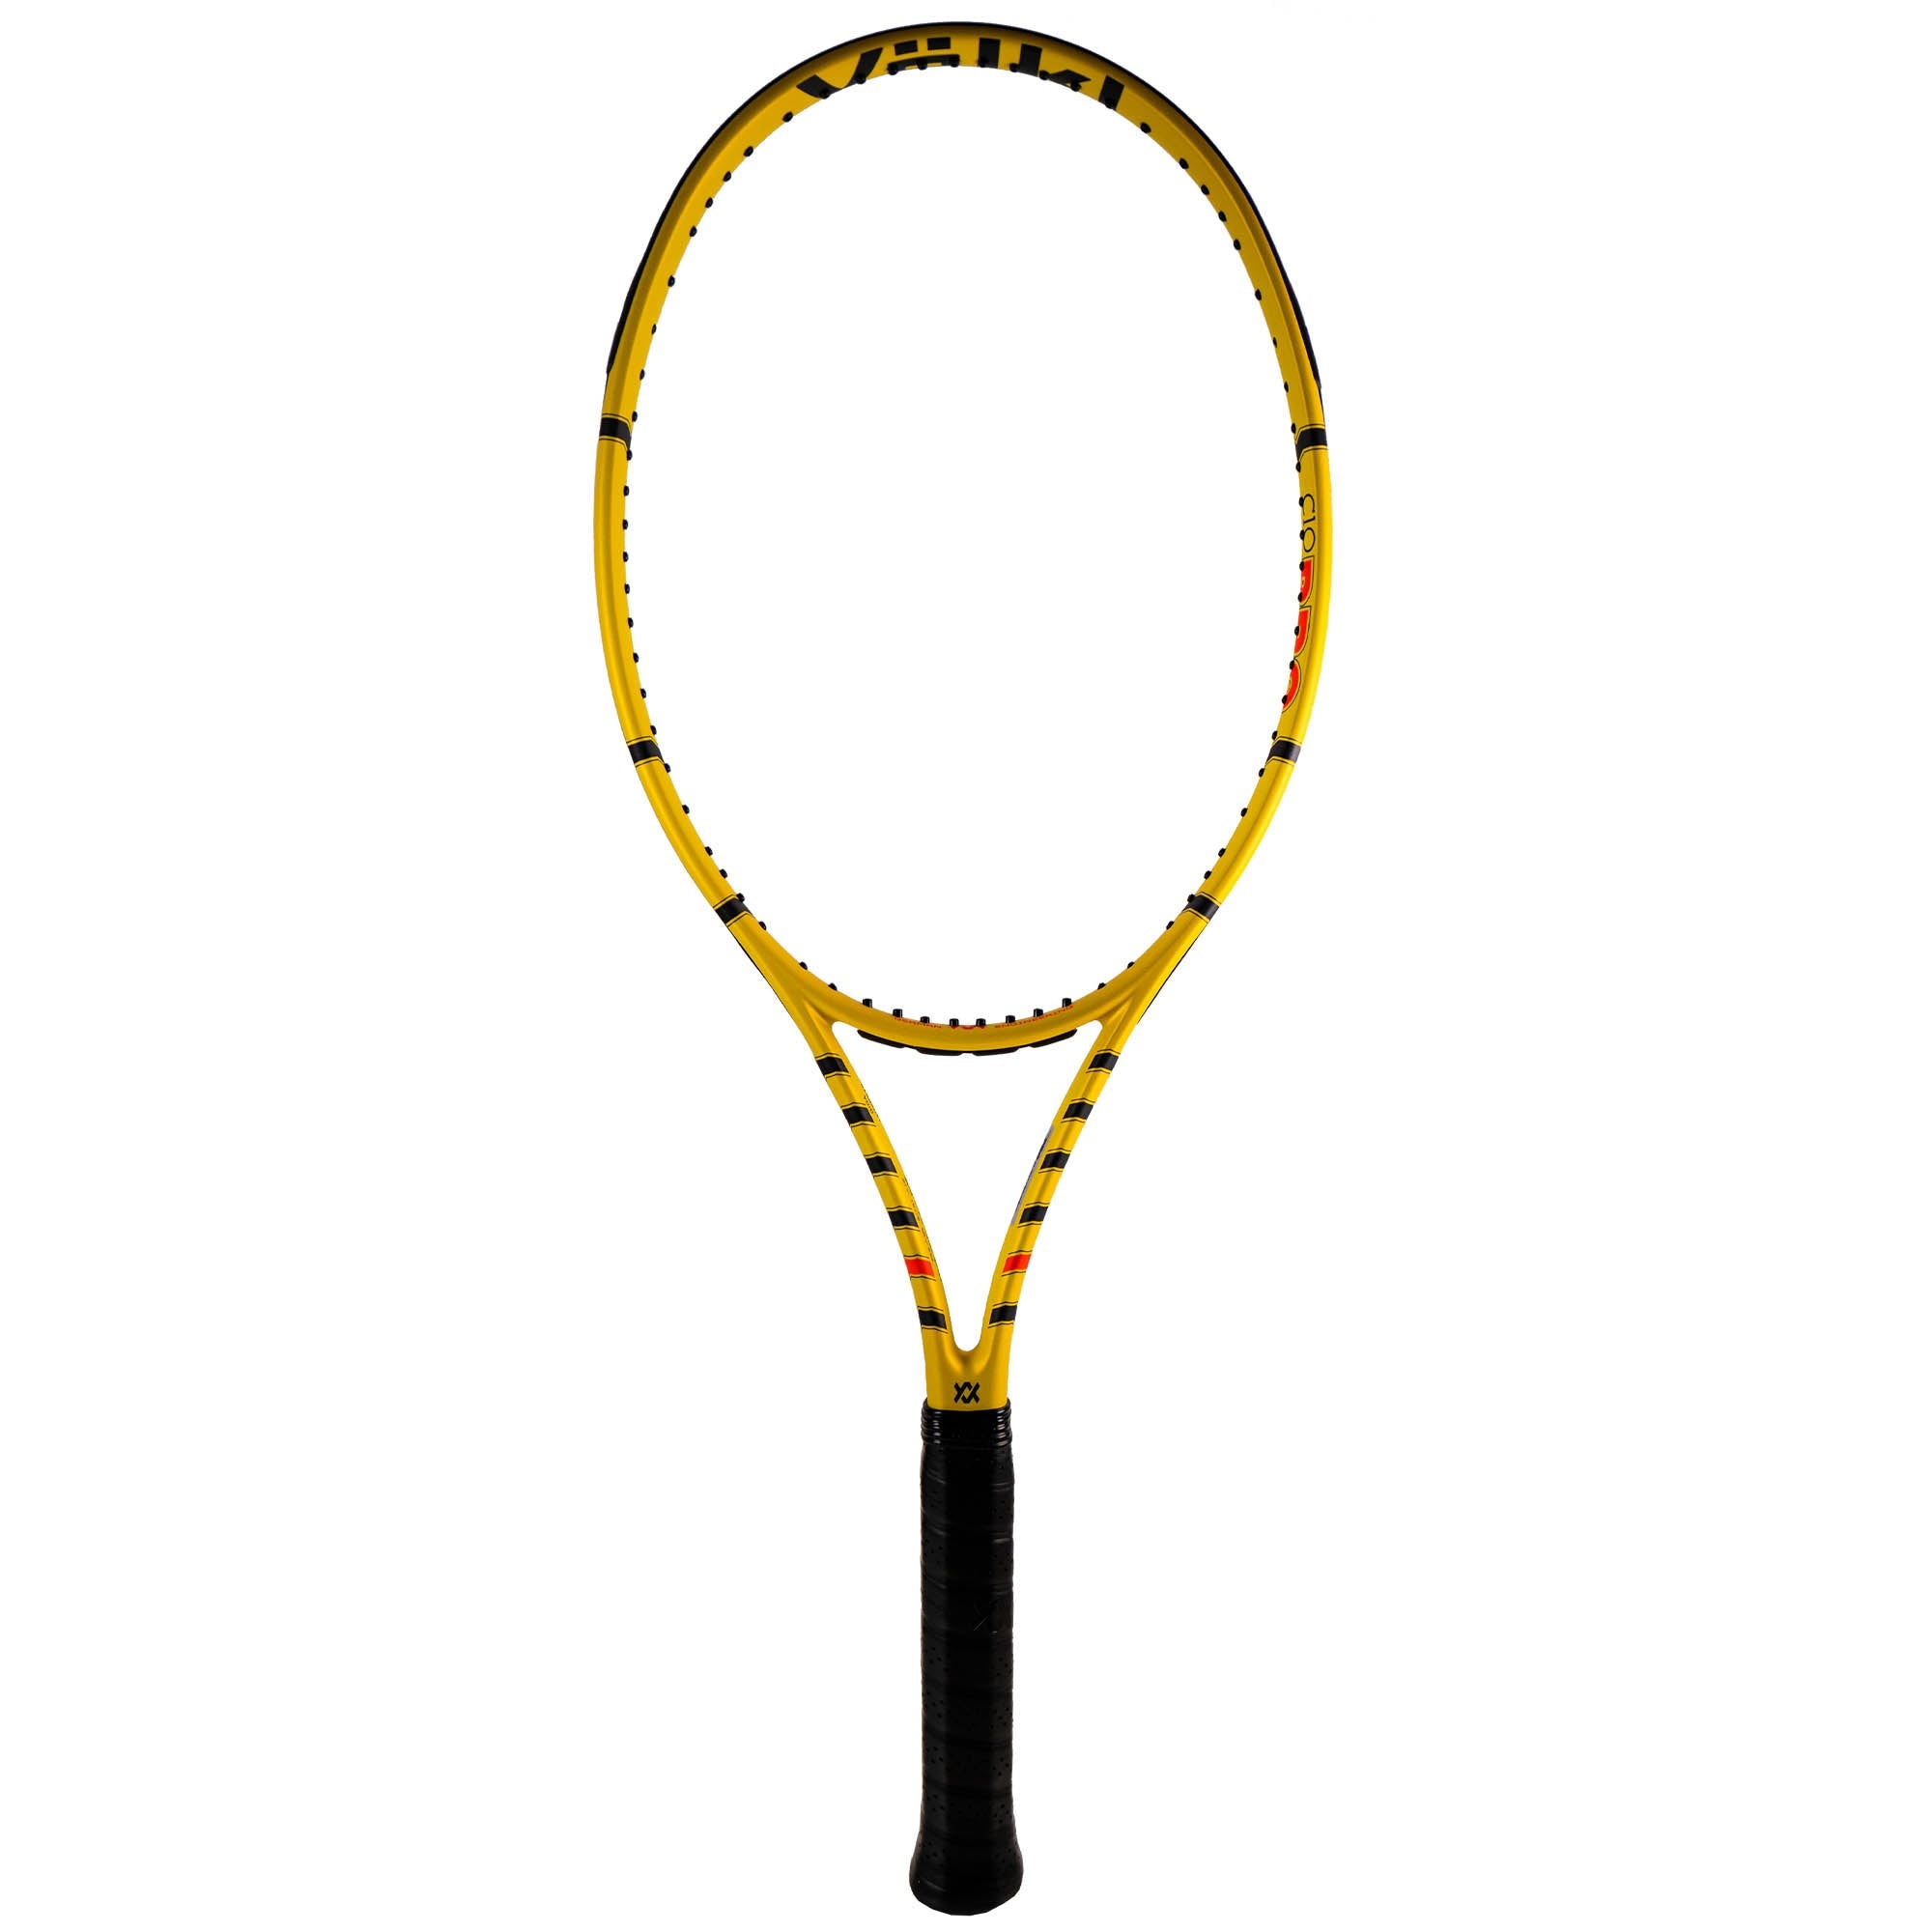 Volkl C10 Pro 25 Years Limited Edition Tennis Racket